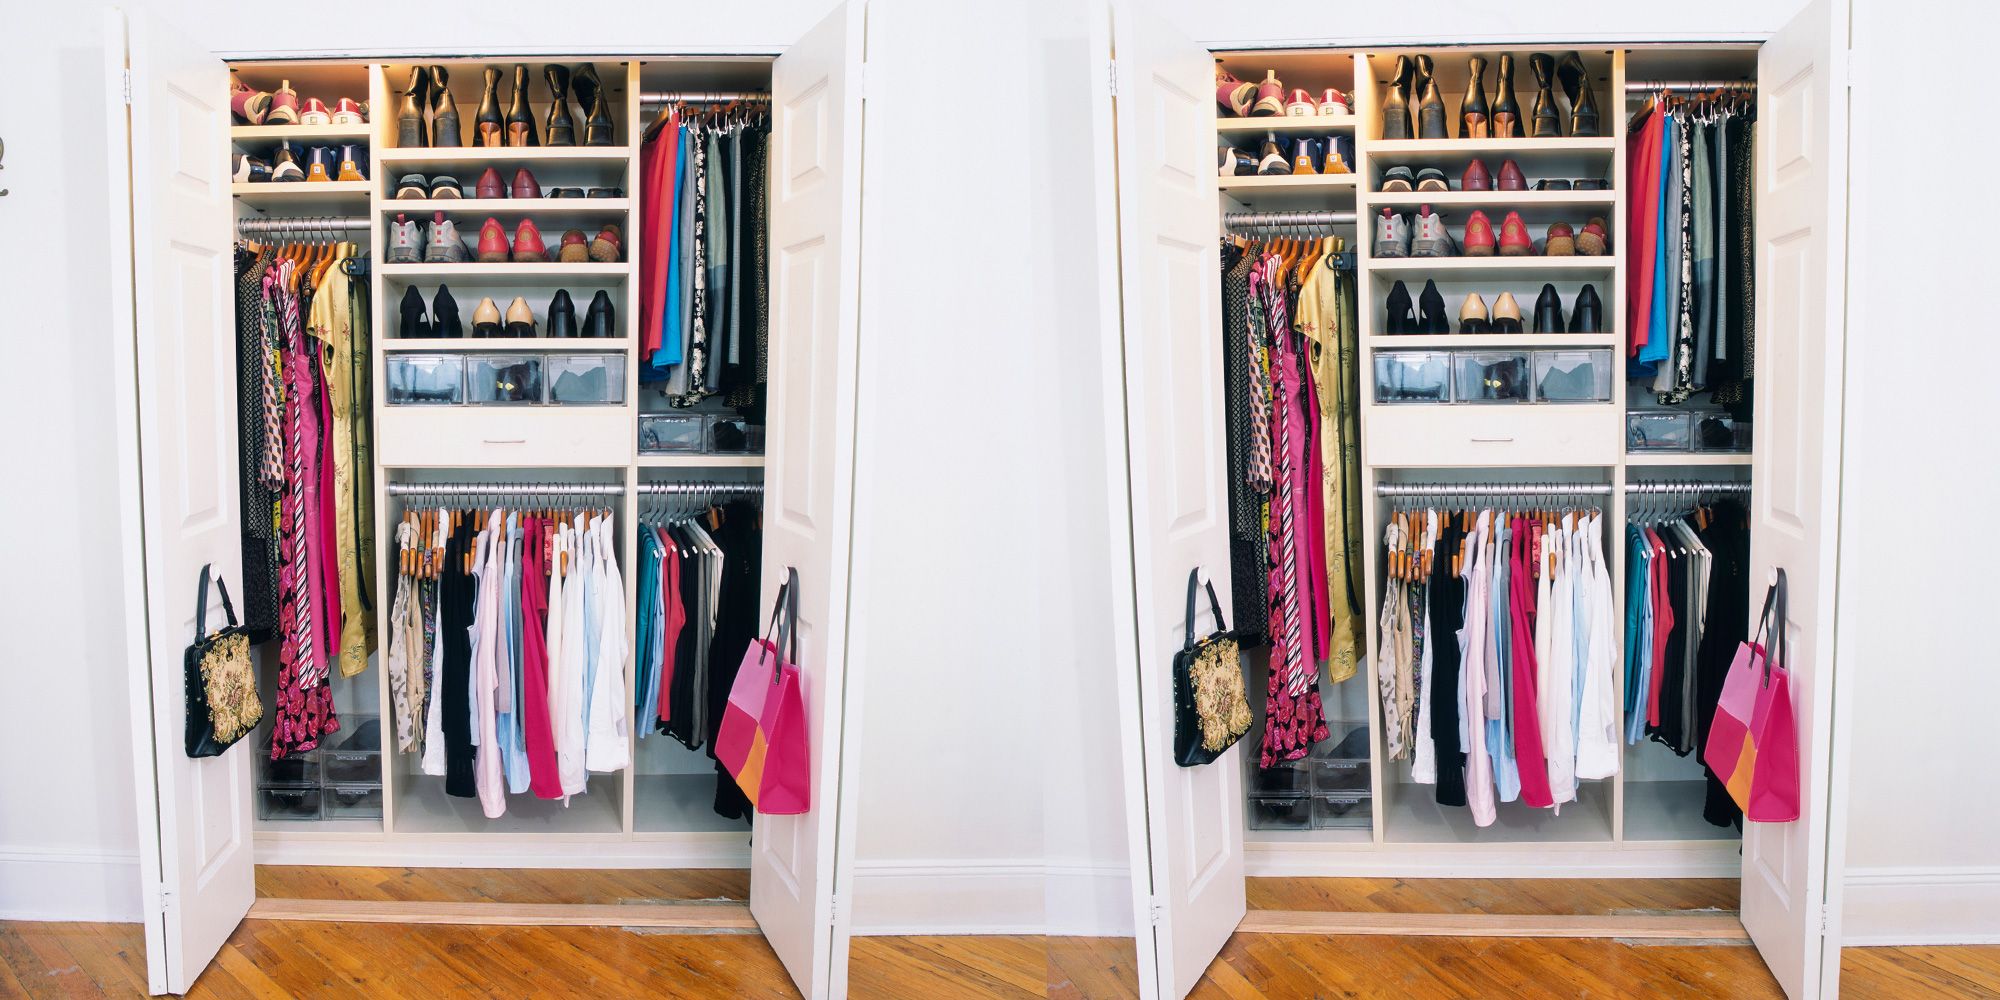 Any hacks for not having your entire wardrobe on the floor by the